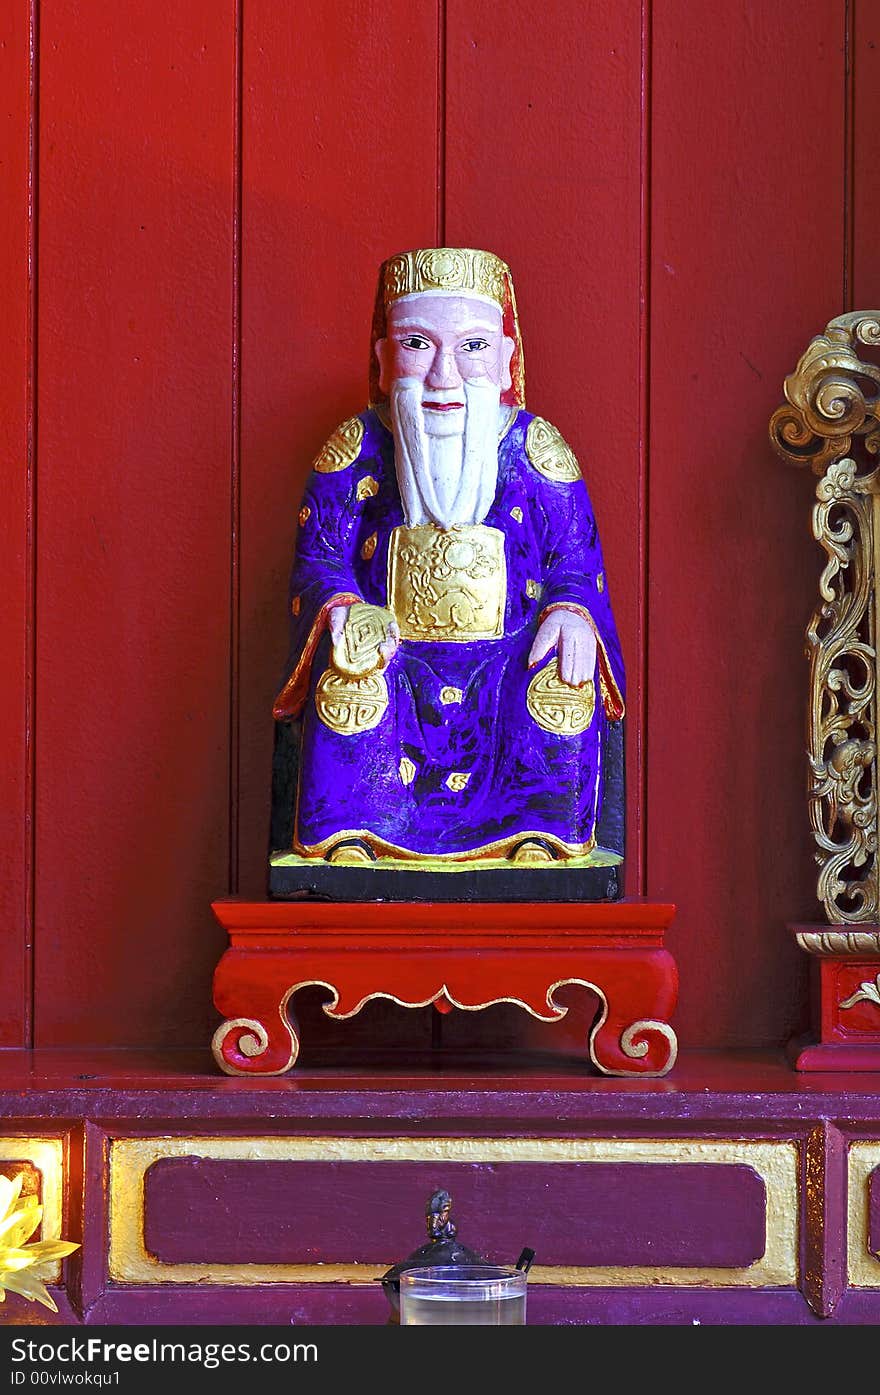 Malaysia, Penang: chinese temple; red background for this religious chinese statue